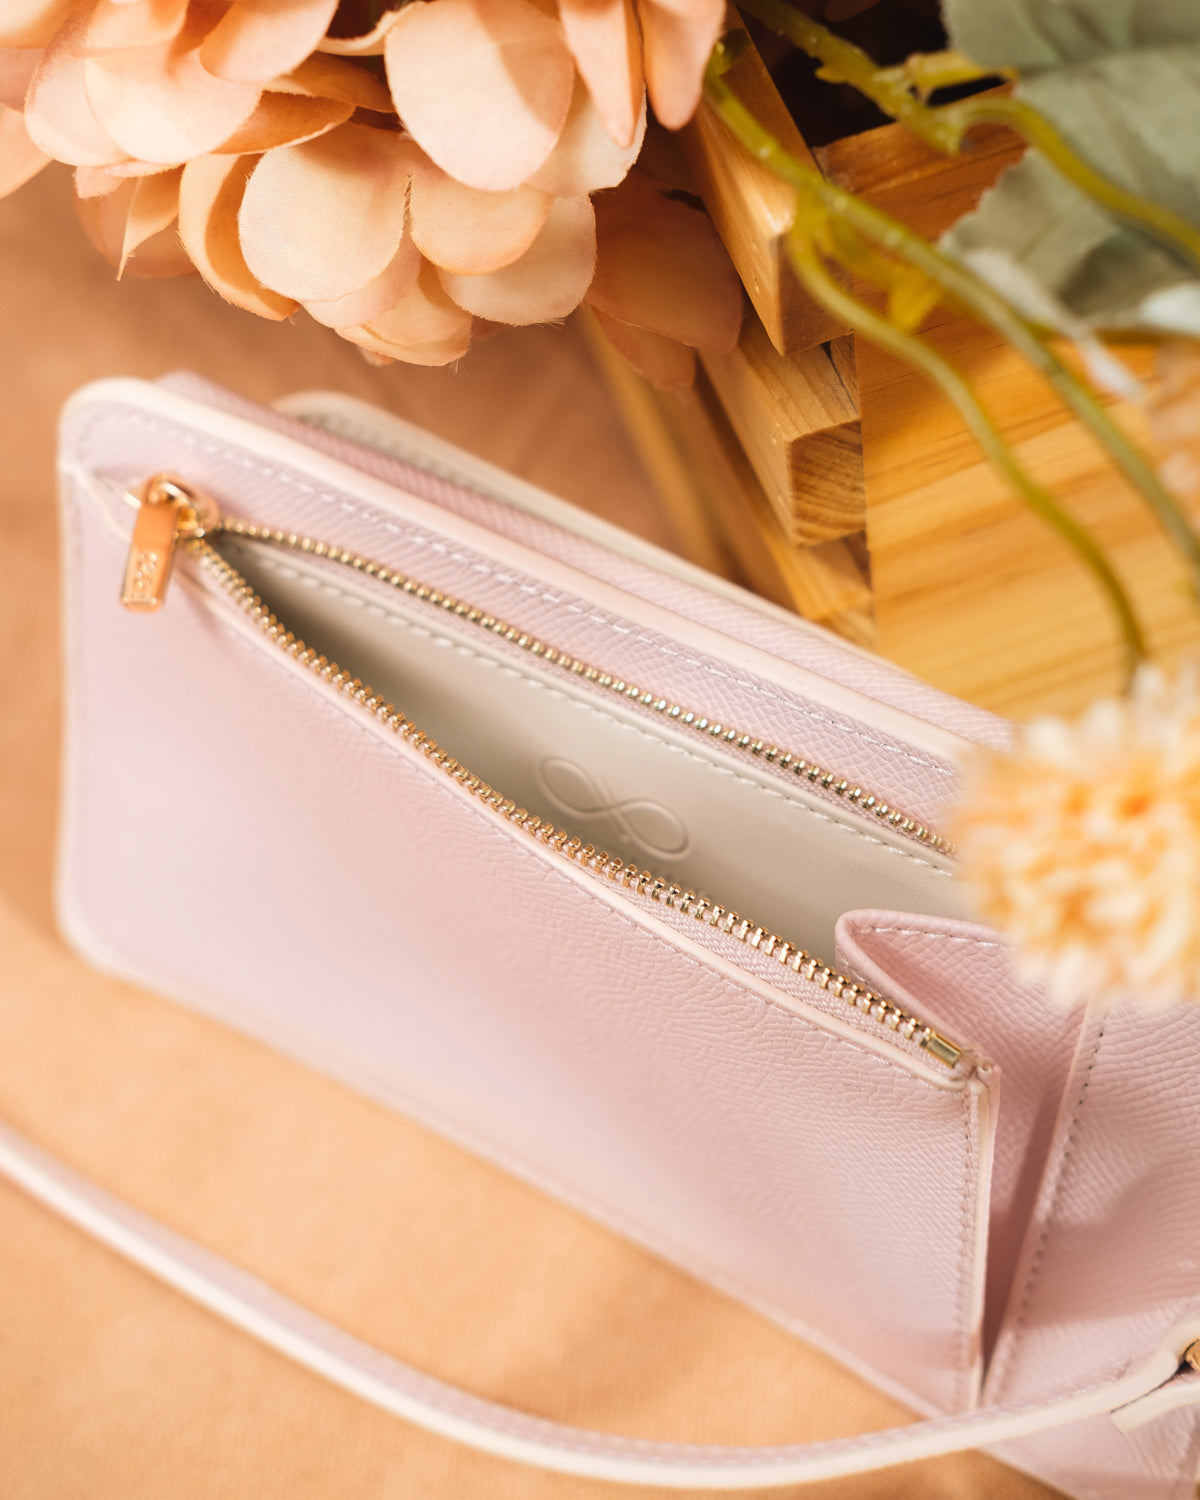 ATHENA PHONE BAG IN FAIRY PINK